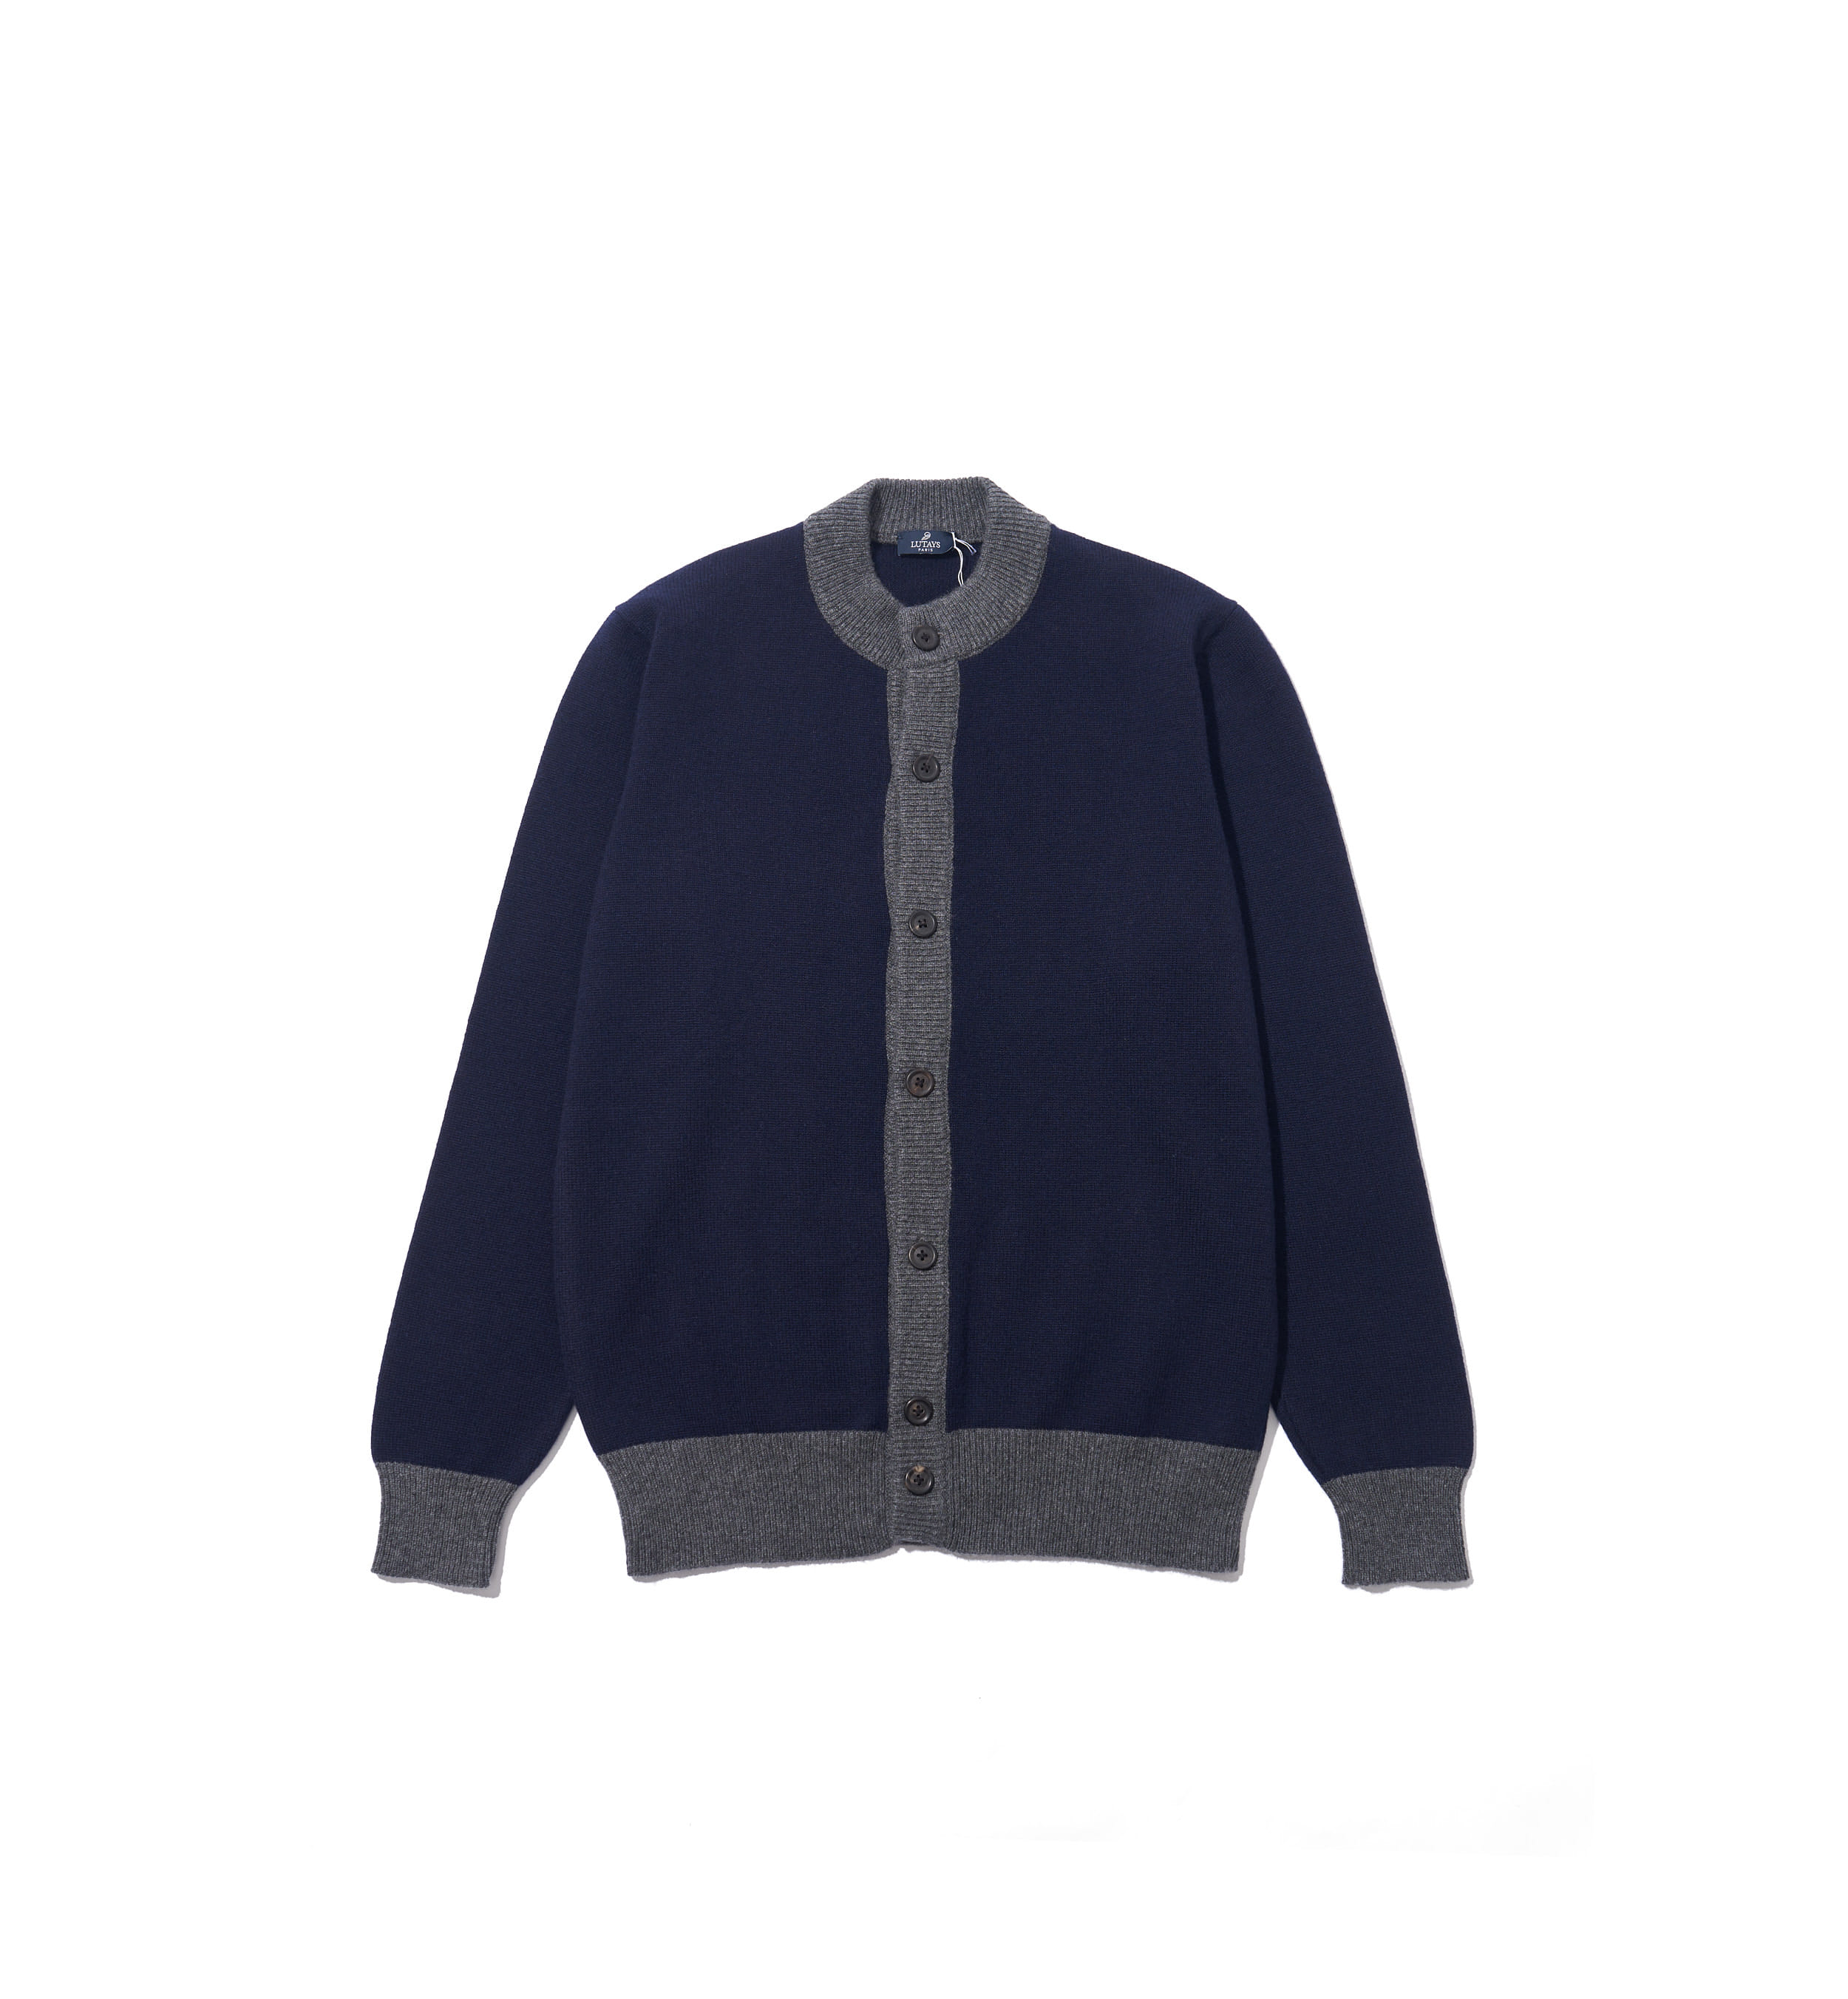 St Germain Cashmere Classic Navy/Classic Grey